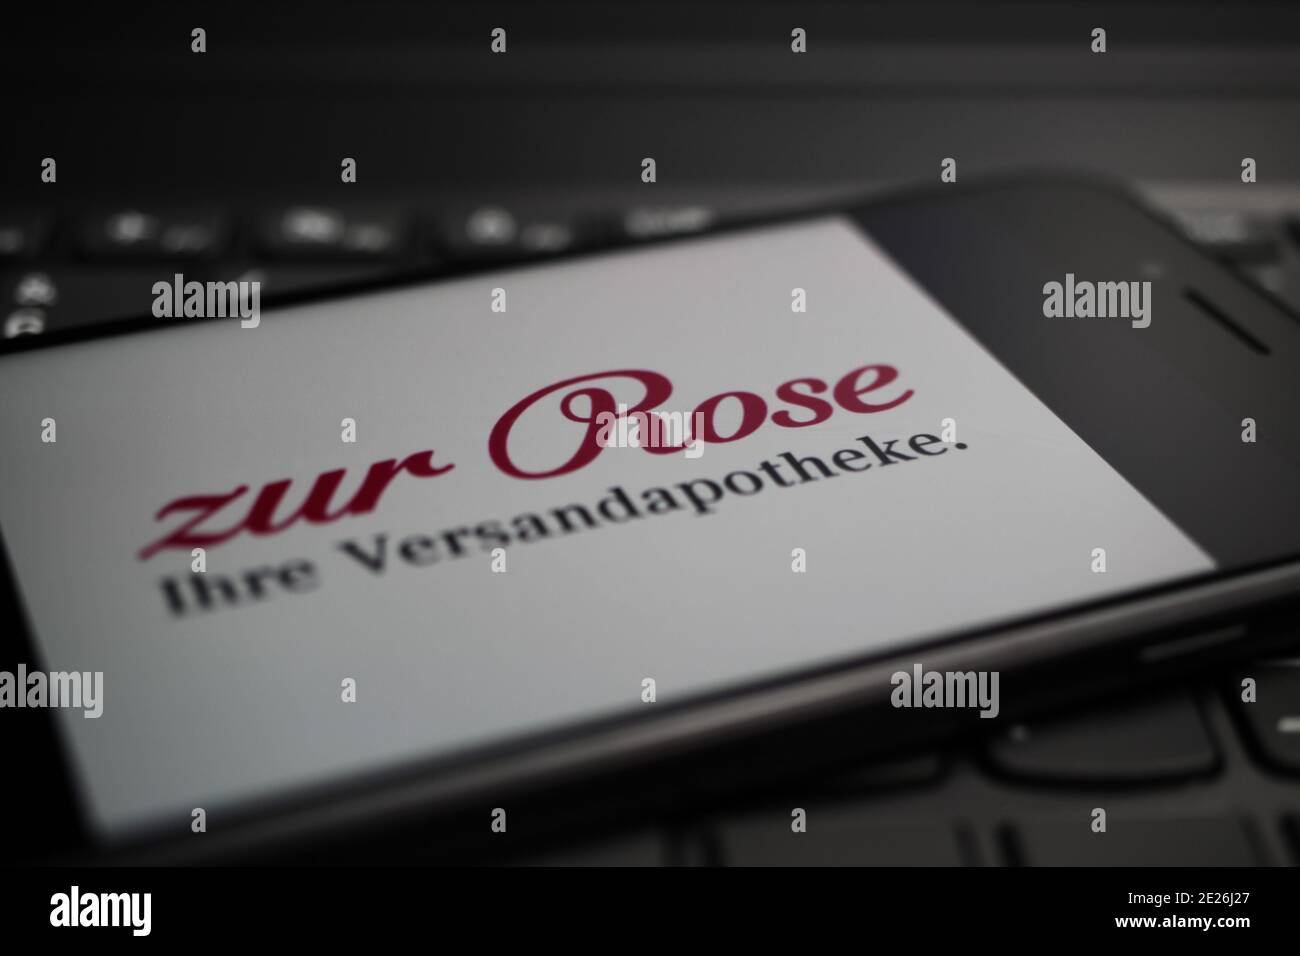 Zur Rose High Resolution Stock Photography and Images - Alamy